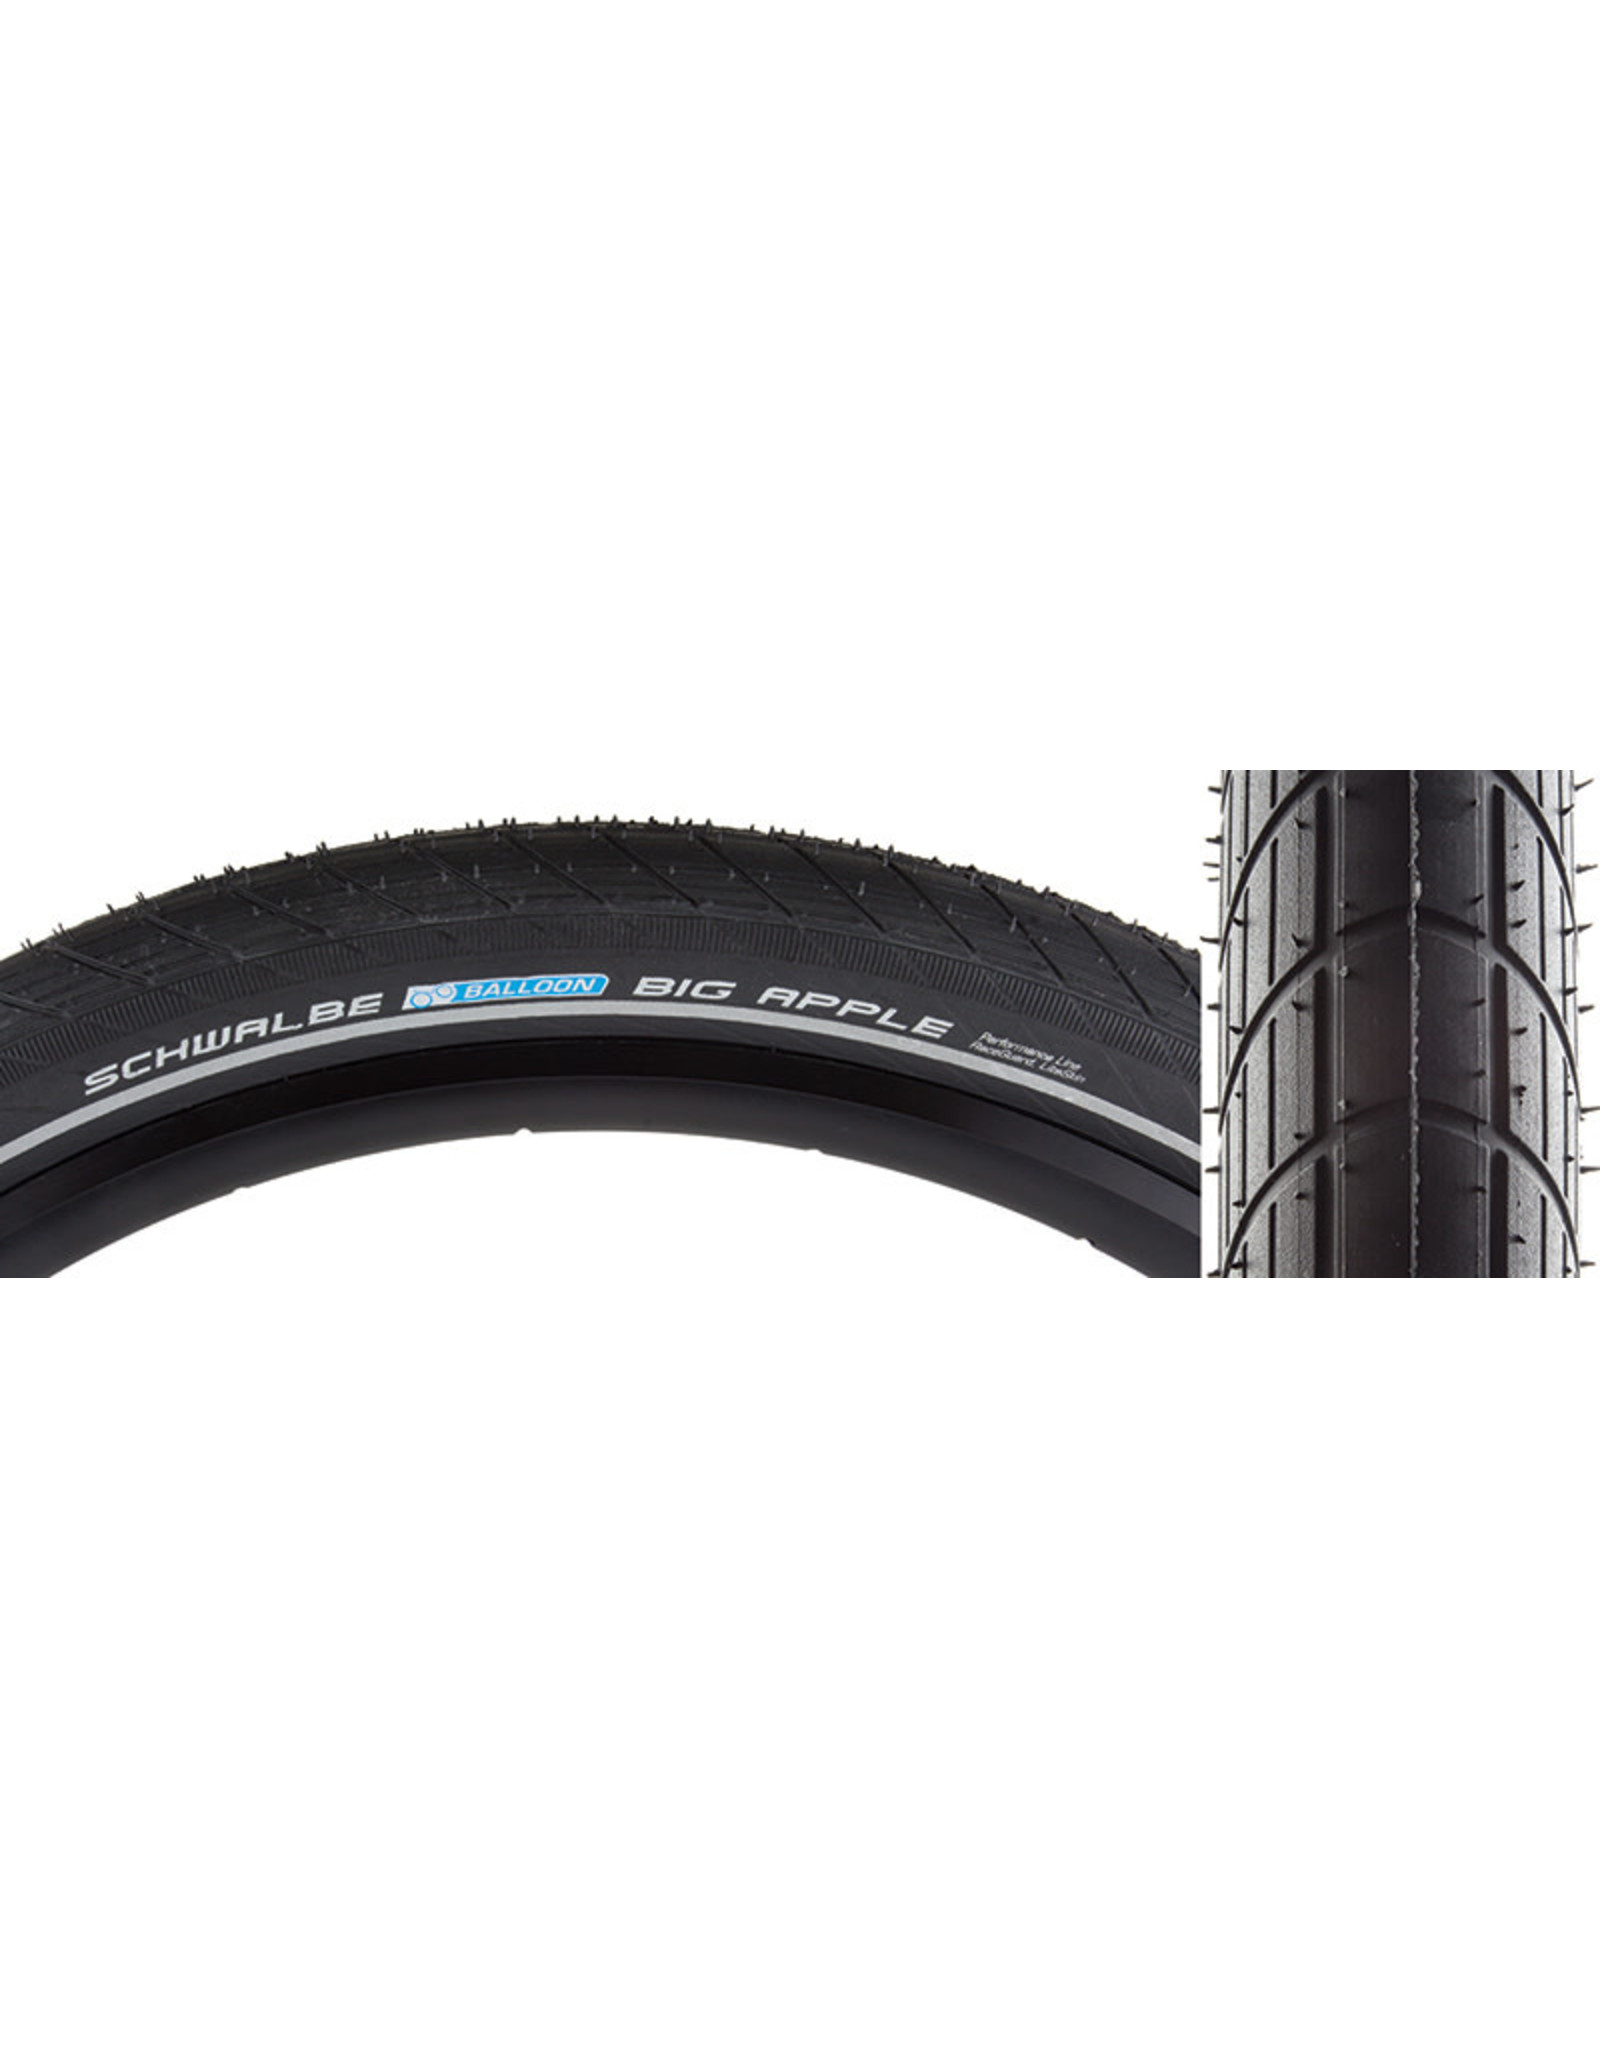 Schwalbe Big Apple Tire 29 x 2.35, Clincher, Wire, Performance Line - Cycles